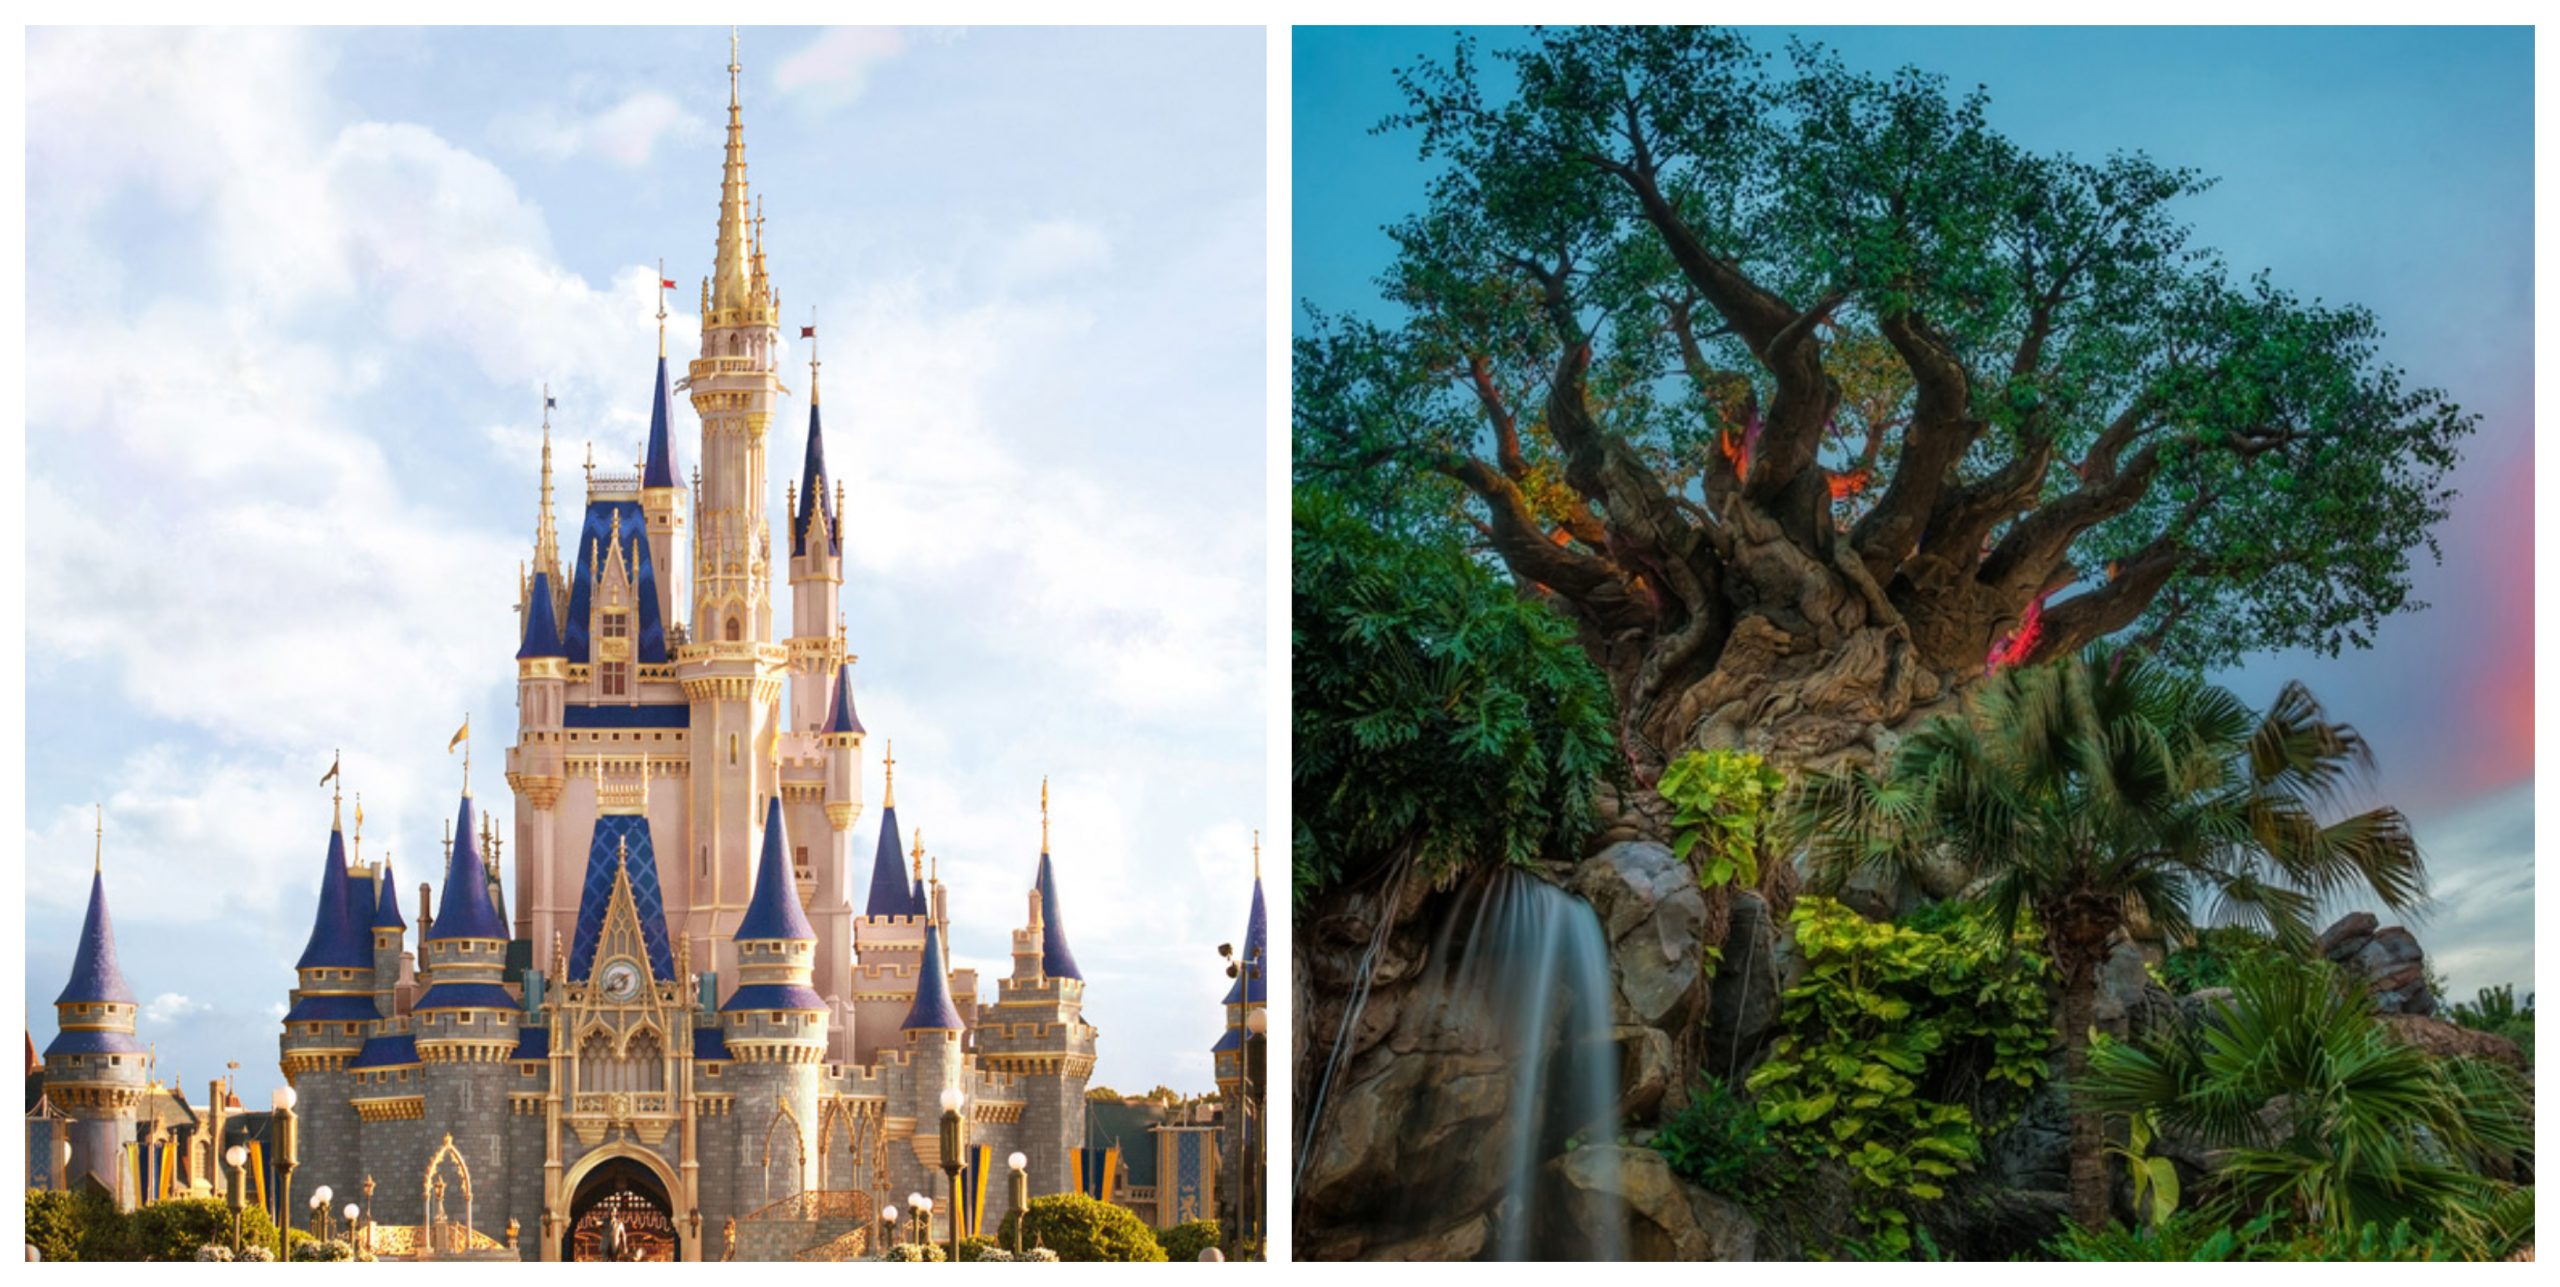 Relaxation Station locations for the Magic Kingdom and the Animal Kingdom